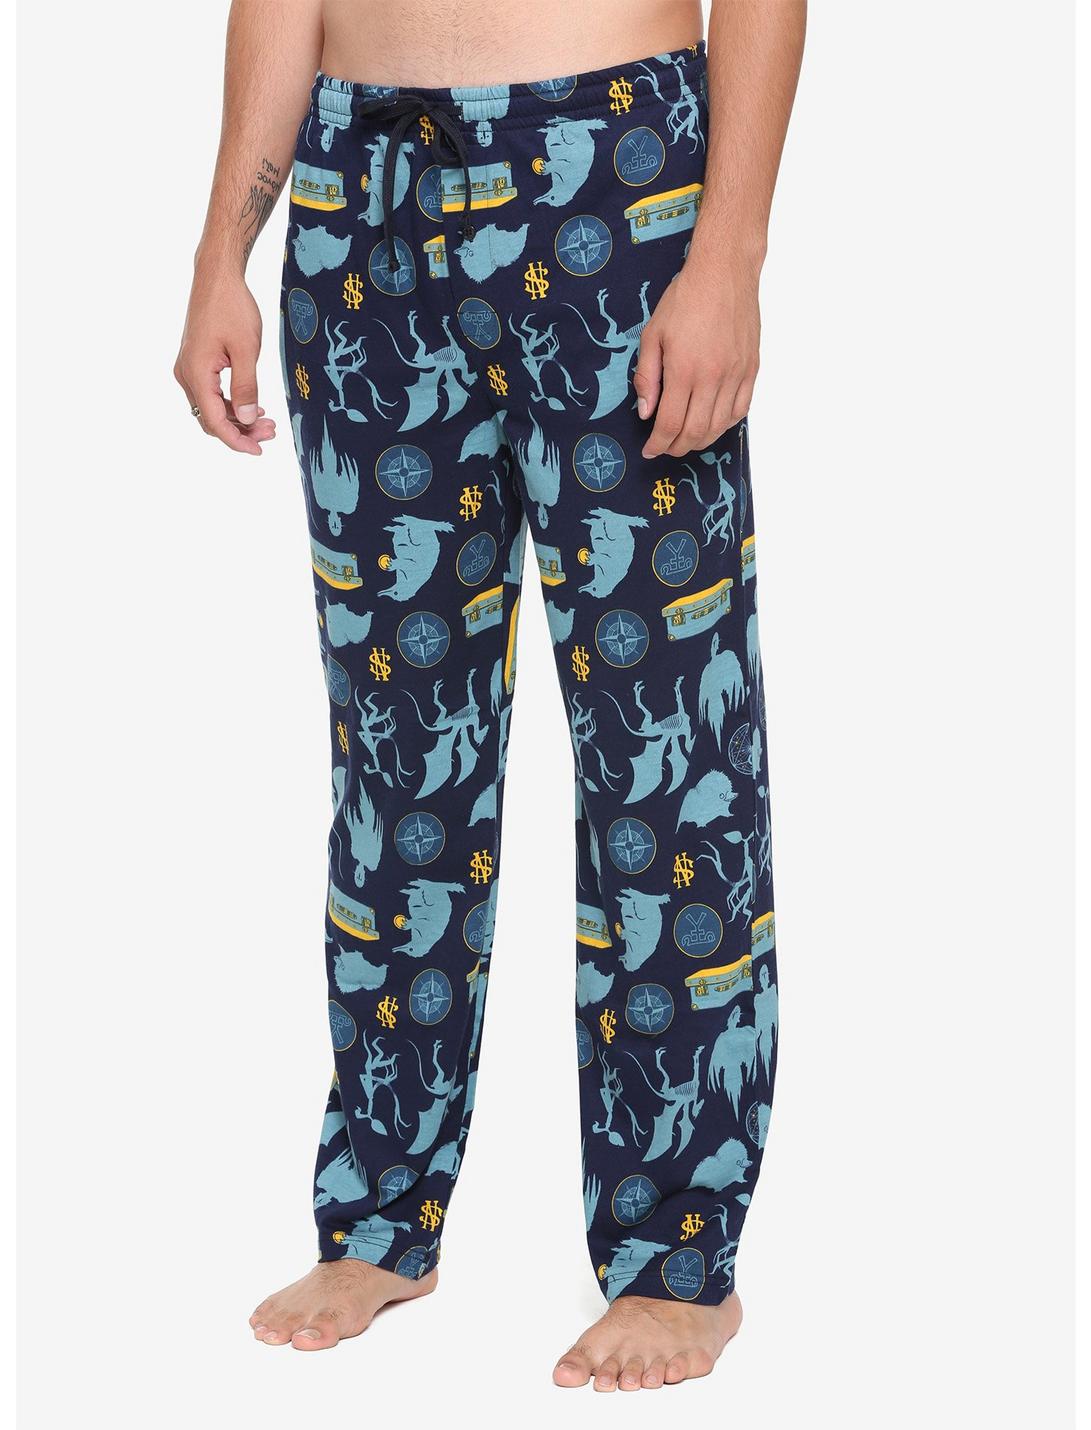 Fantastic Beasts: The Crimes Of Grindelwald Creature Icons Guys Pajama Pants, BLUE, hi-res